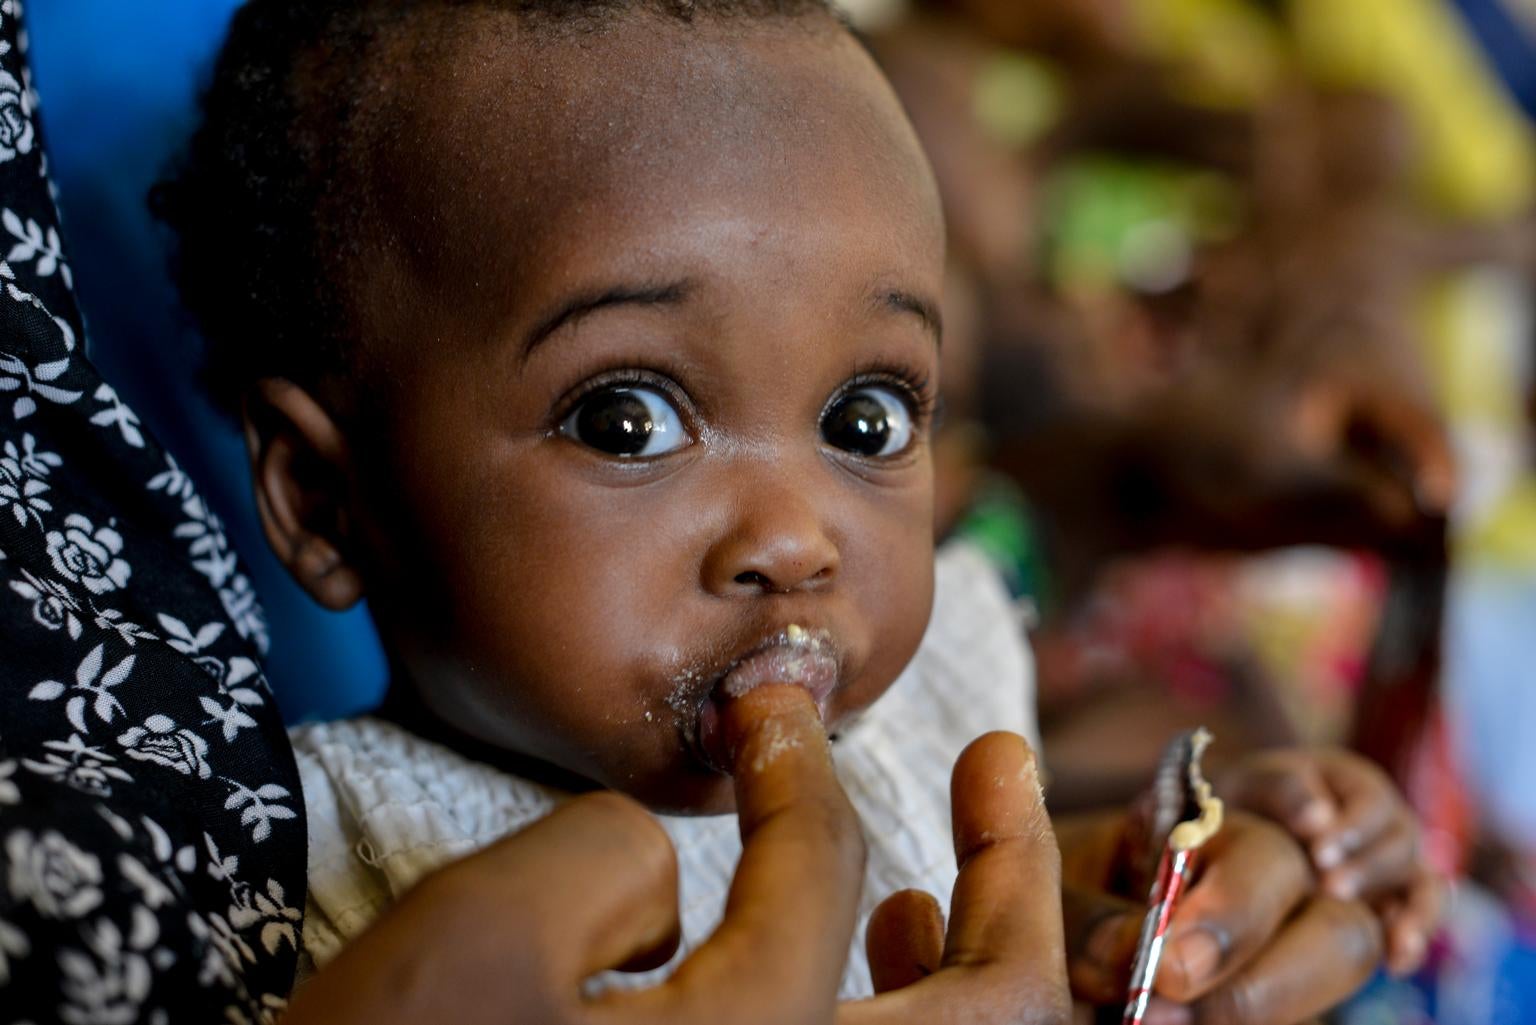 a woman feeds her infant from a sachet of ready-to-use therapeutic food